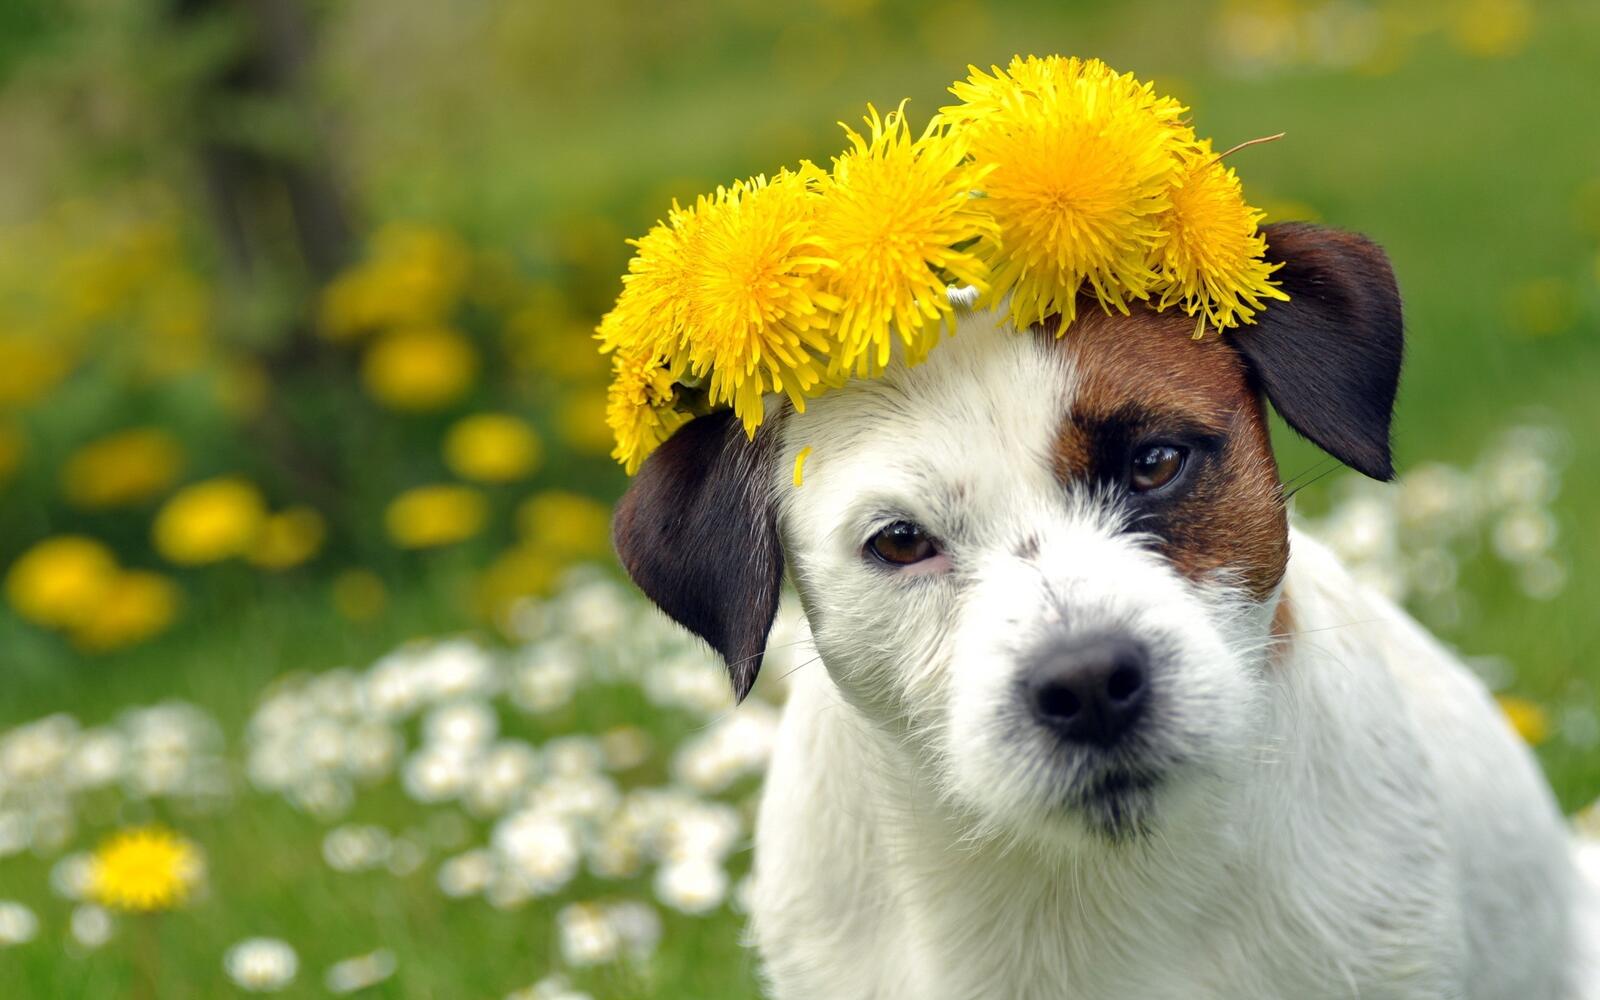 Free photo A puppy with yellow flowers on his head.